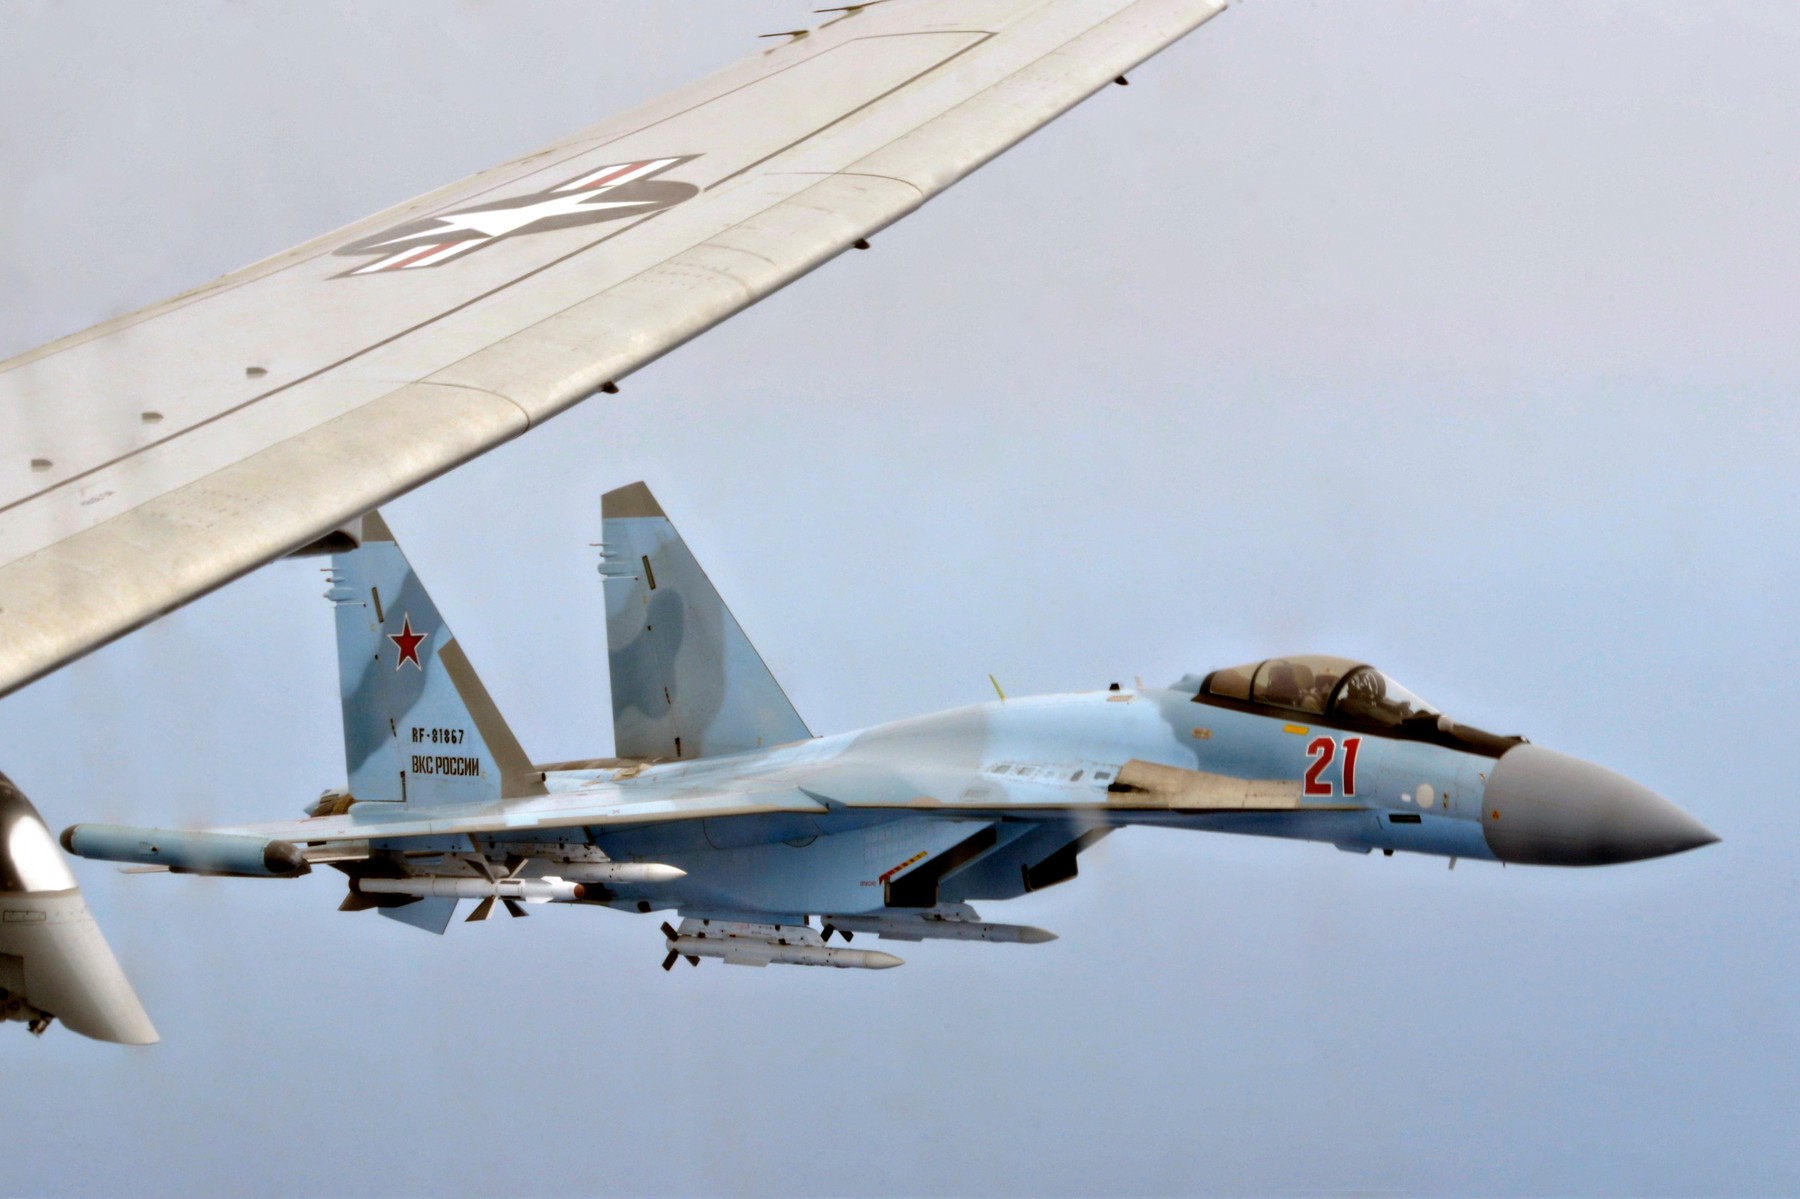 May 26, 2020, Mediterranean Sea, United States: Two Russian Su-35 Flanker-E fighter aircraft shadow at an unsafe distance, a U.S. Navy P-8A Poseidon patrol aircraft assigned to 6th Fleet May 26, 2020 over the Mediterranean Sea. May 26, 2020. The Russian intercept lasted 64 minutes and created an unsafe flight environment., Image: 522948748, License: Rights-managed, Restrictions: , Model Release: no, Credit line: Jonathan Nelson/U.S. Navy / Zuma Press / Profimedia